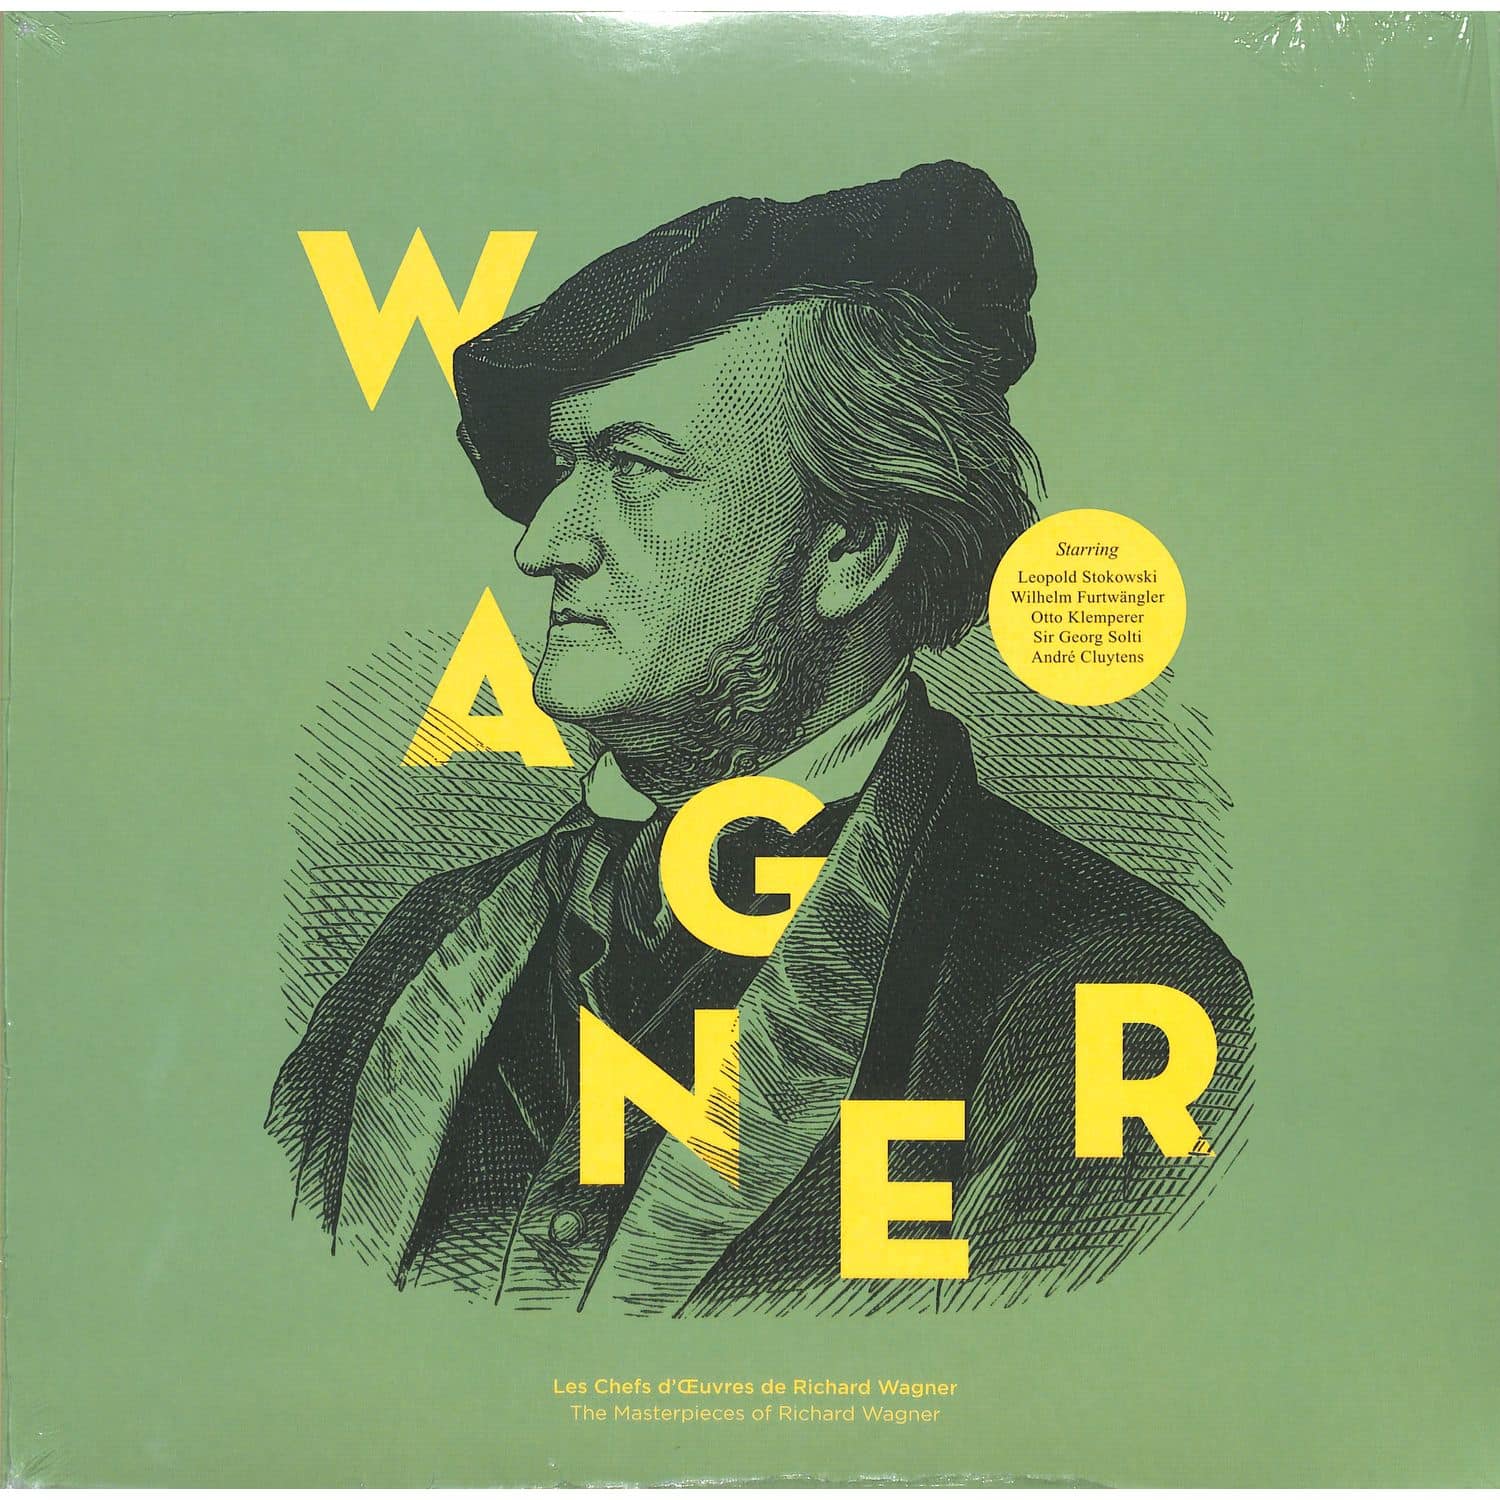 Richard Wagner - THE MASTERPIECES OF... 